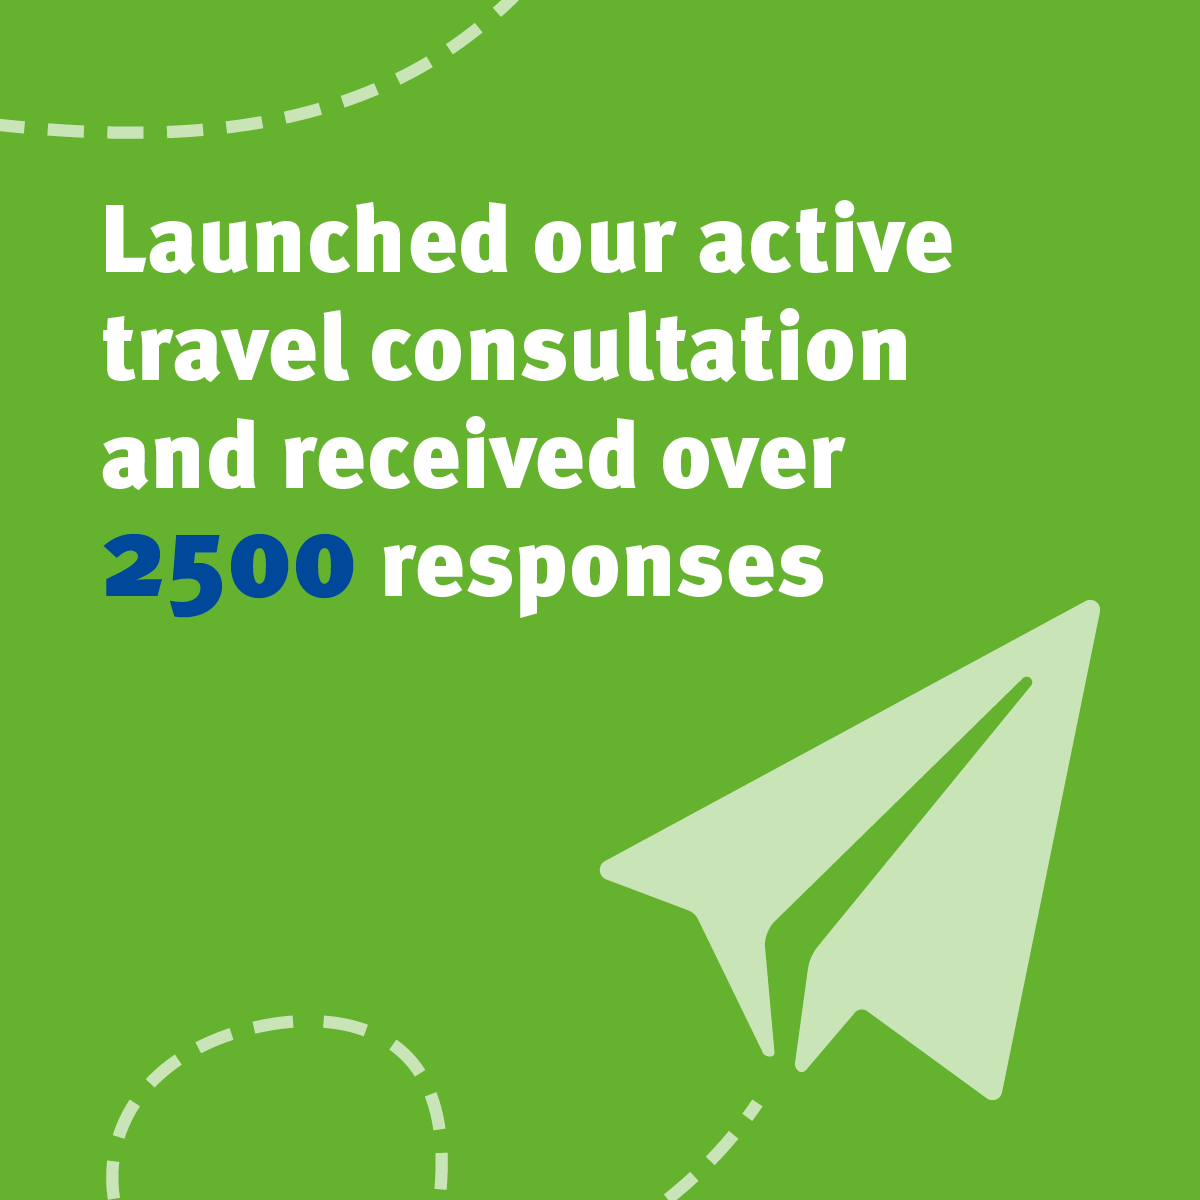 Launched our active travel consultation and received over 2500 responses